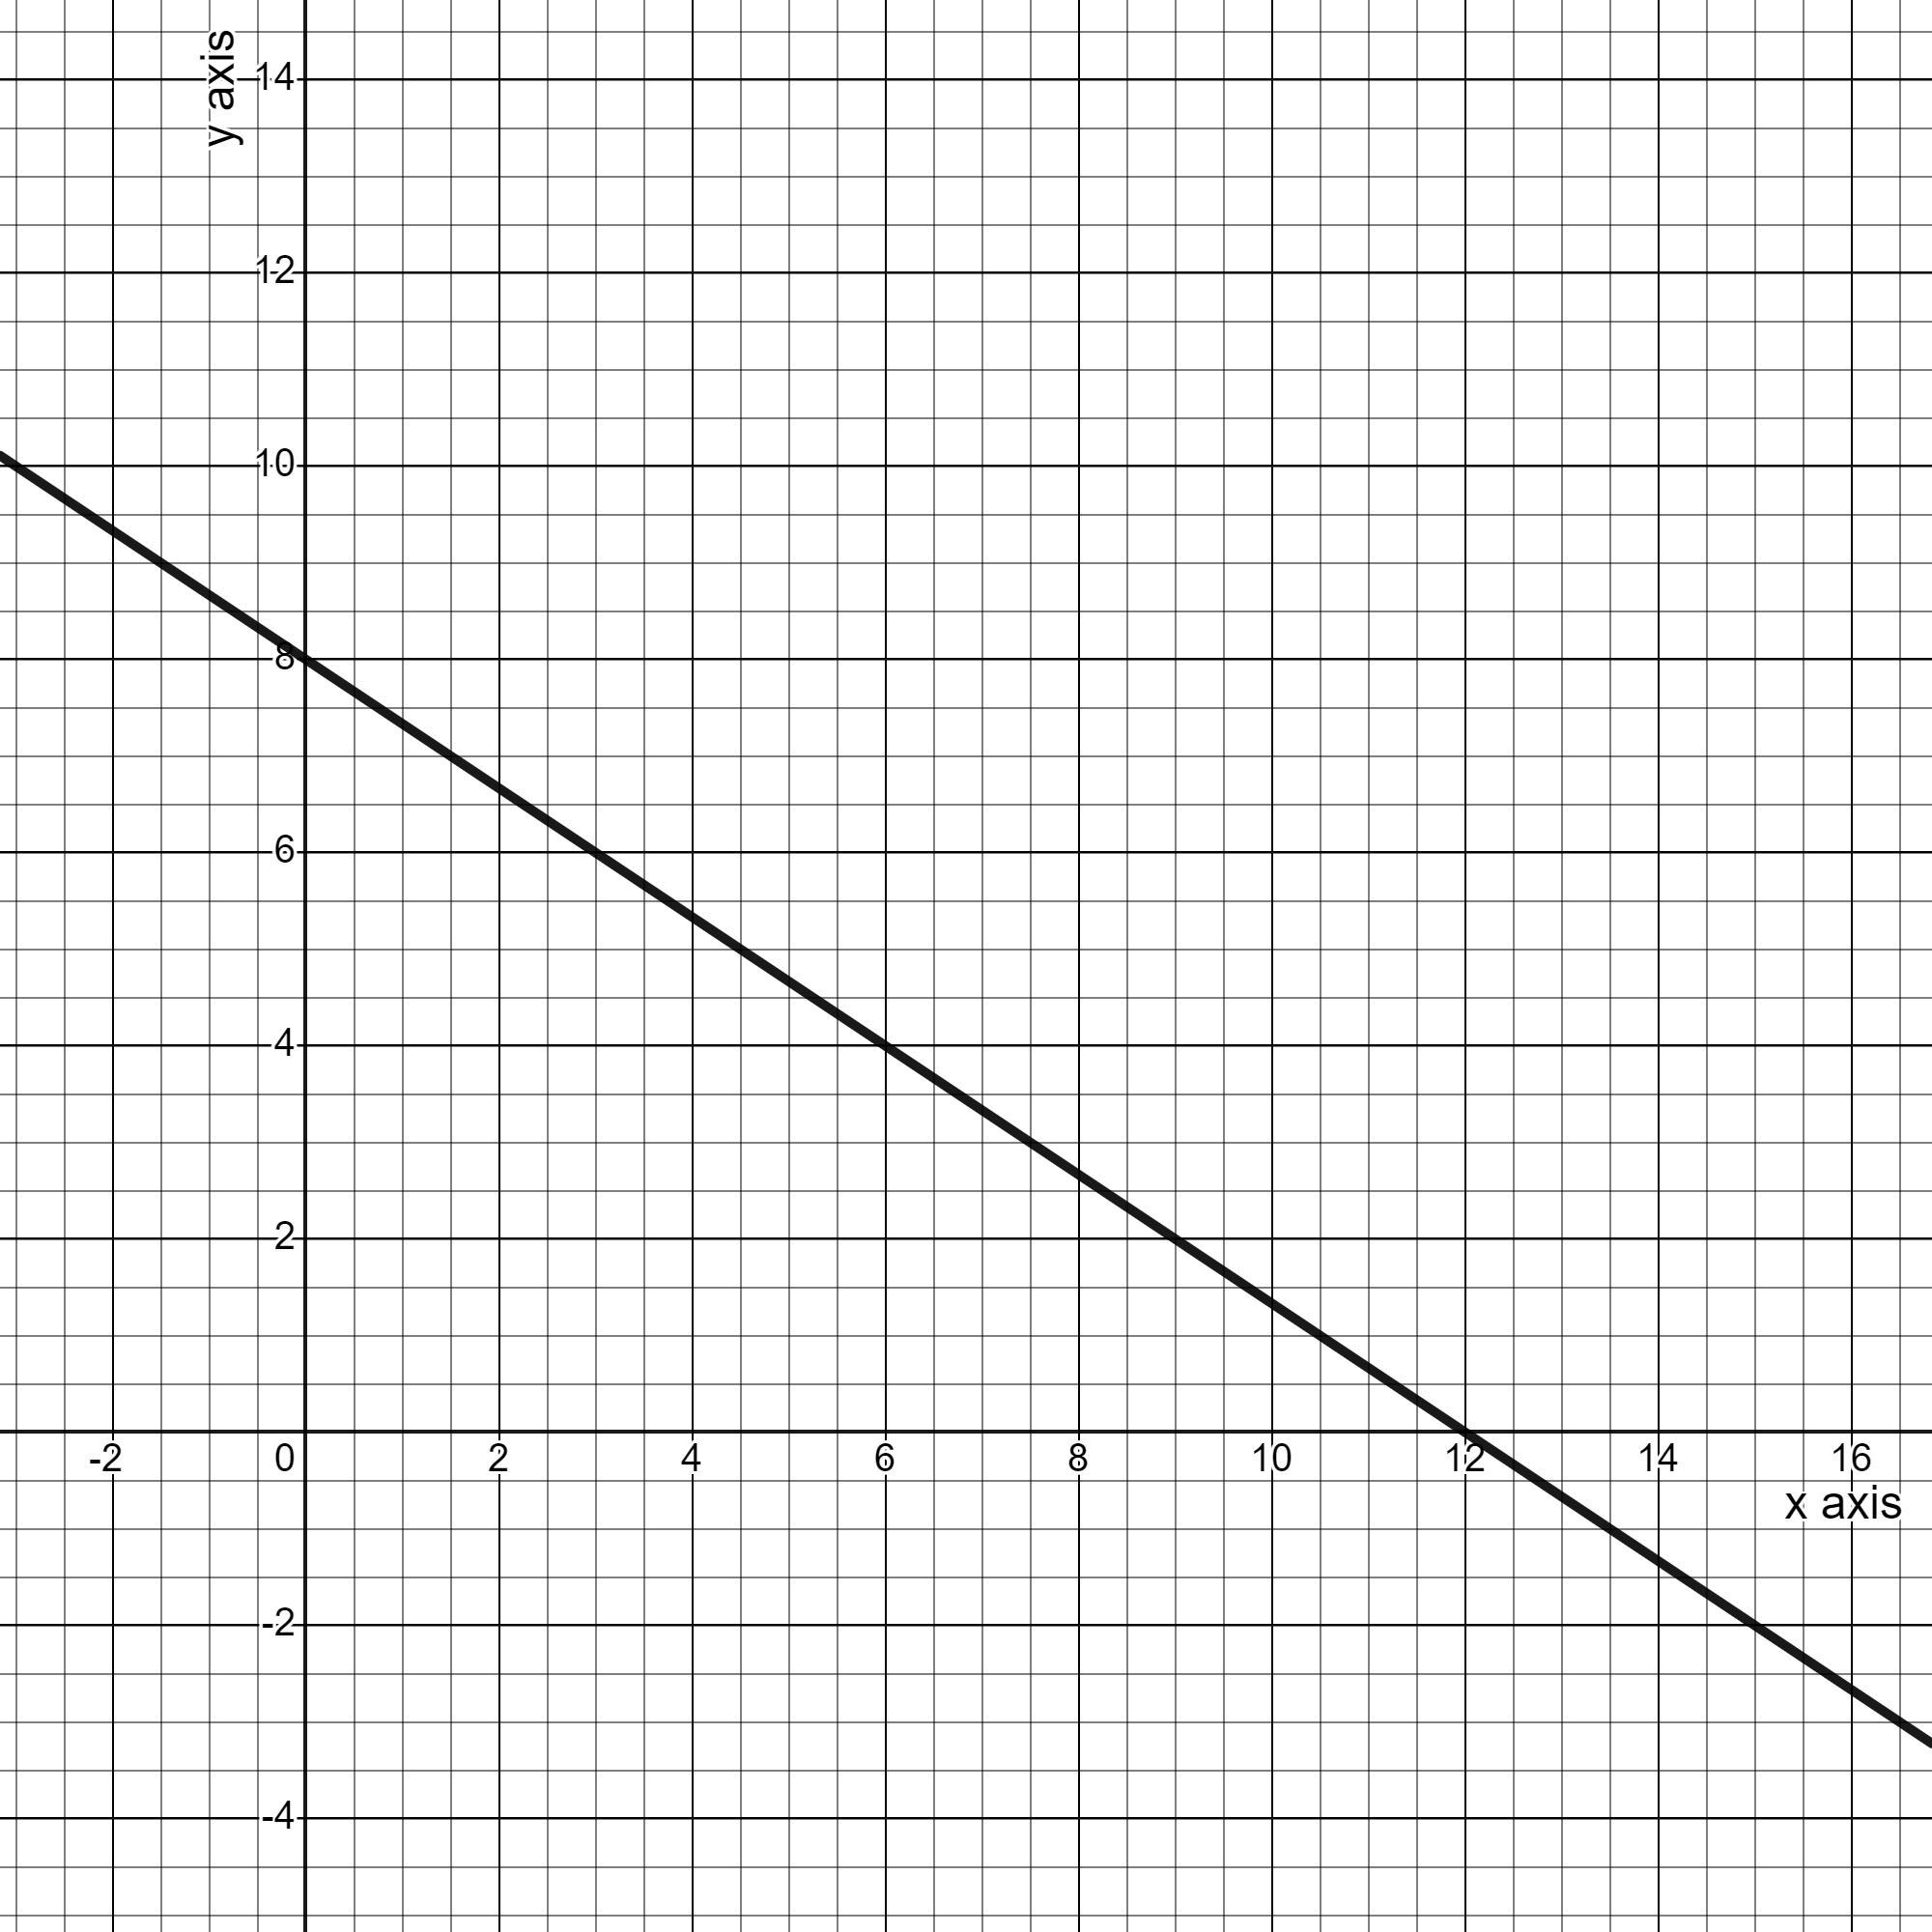 Graph The Line Y=-2/3 X+8 With Appropriate Labels And Scale. Plot The Point On The Line That Represents